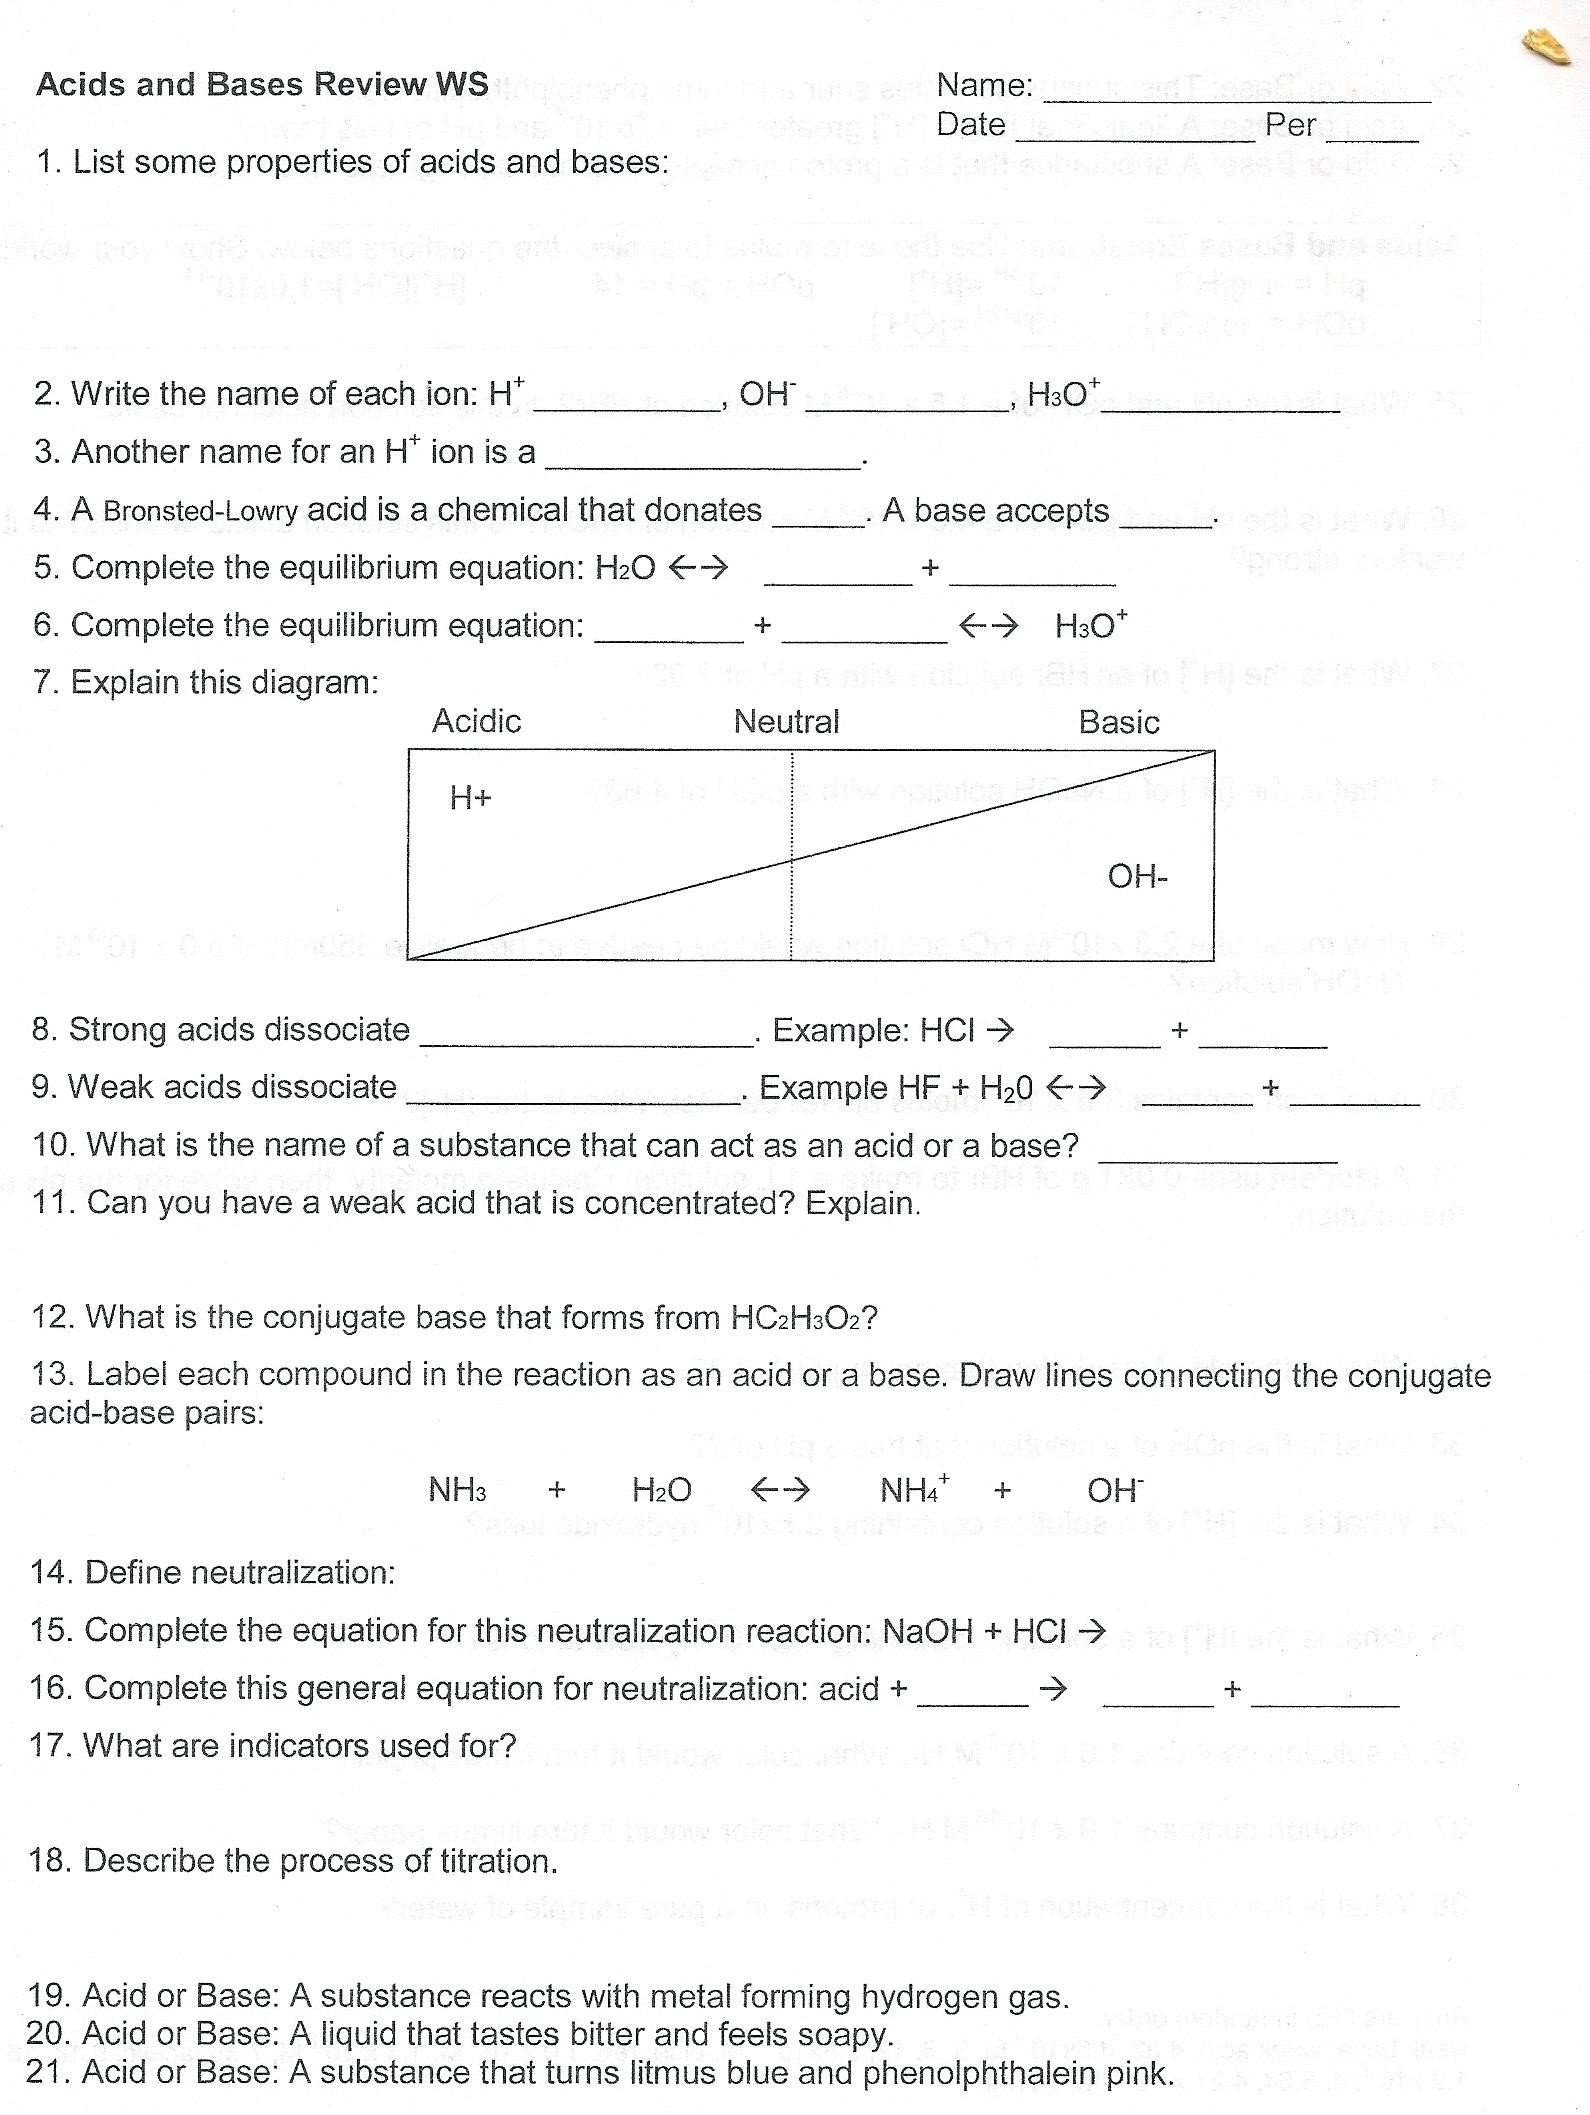 Mixed Naming Worksheet Ionic Covalent And Acids Cursive Worksheets With Regard To Mixed Naming Worksheet Ionic Covalent And Acids